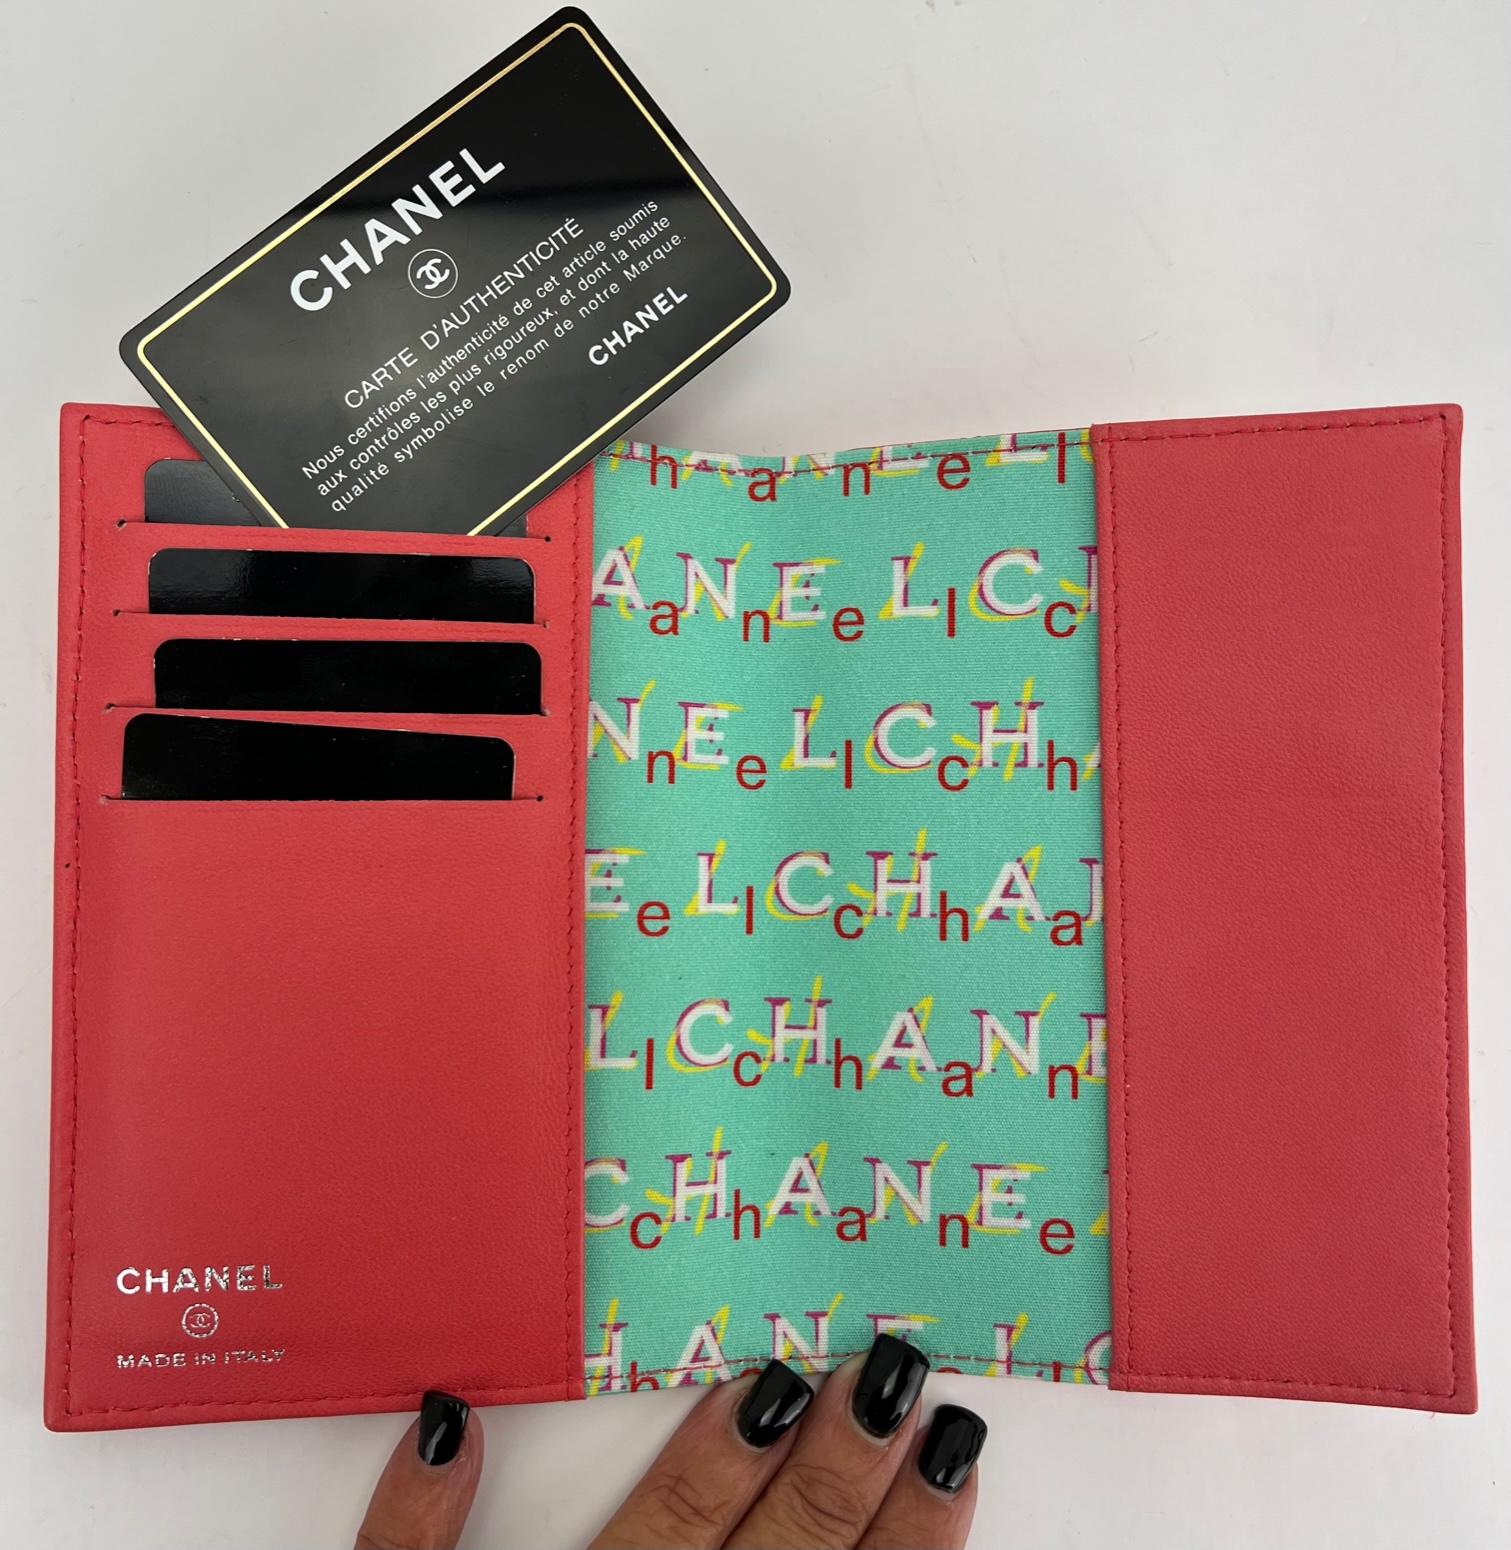 Pre-Owned  100% Authentic
CHANEL Quilted Lambskin Passport Holder 
RATING: B...Very Good, well maintained,
shows minor signs of wear
MATERIAL: lambskin leather
COLOR: coral  
CLOSURE: none
EXTERIOR: tiny tiny wear on 2 corners
ODOR: no
HARDWARE: